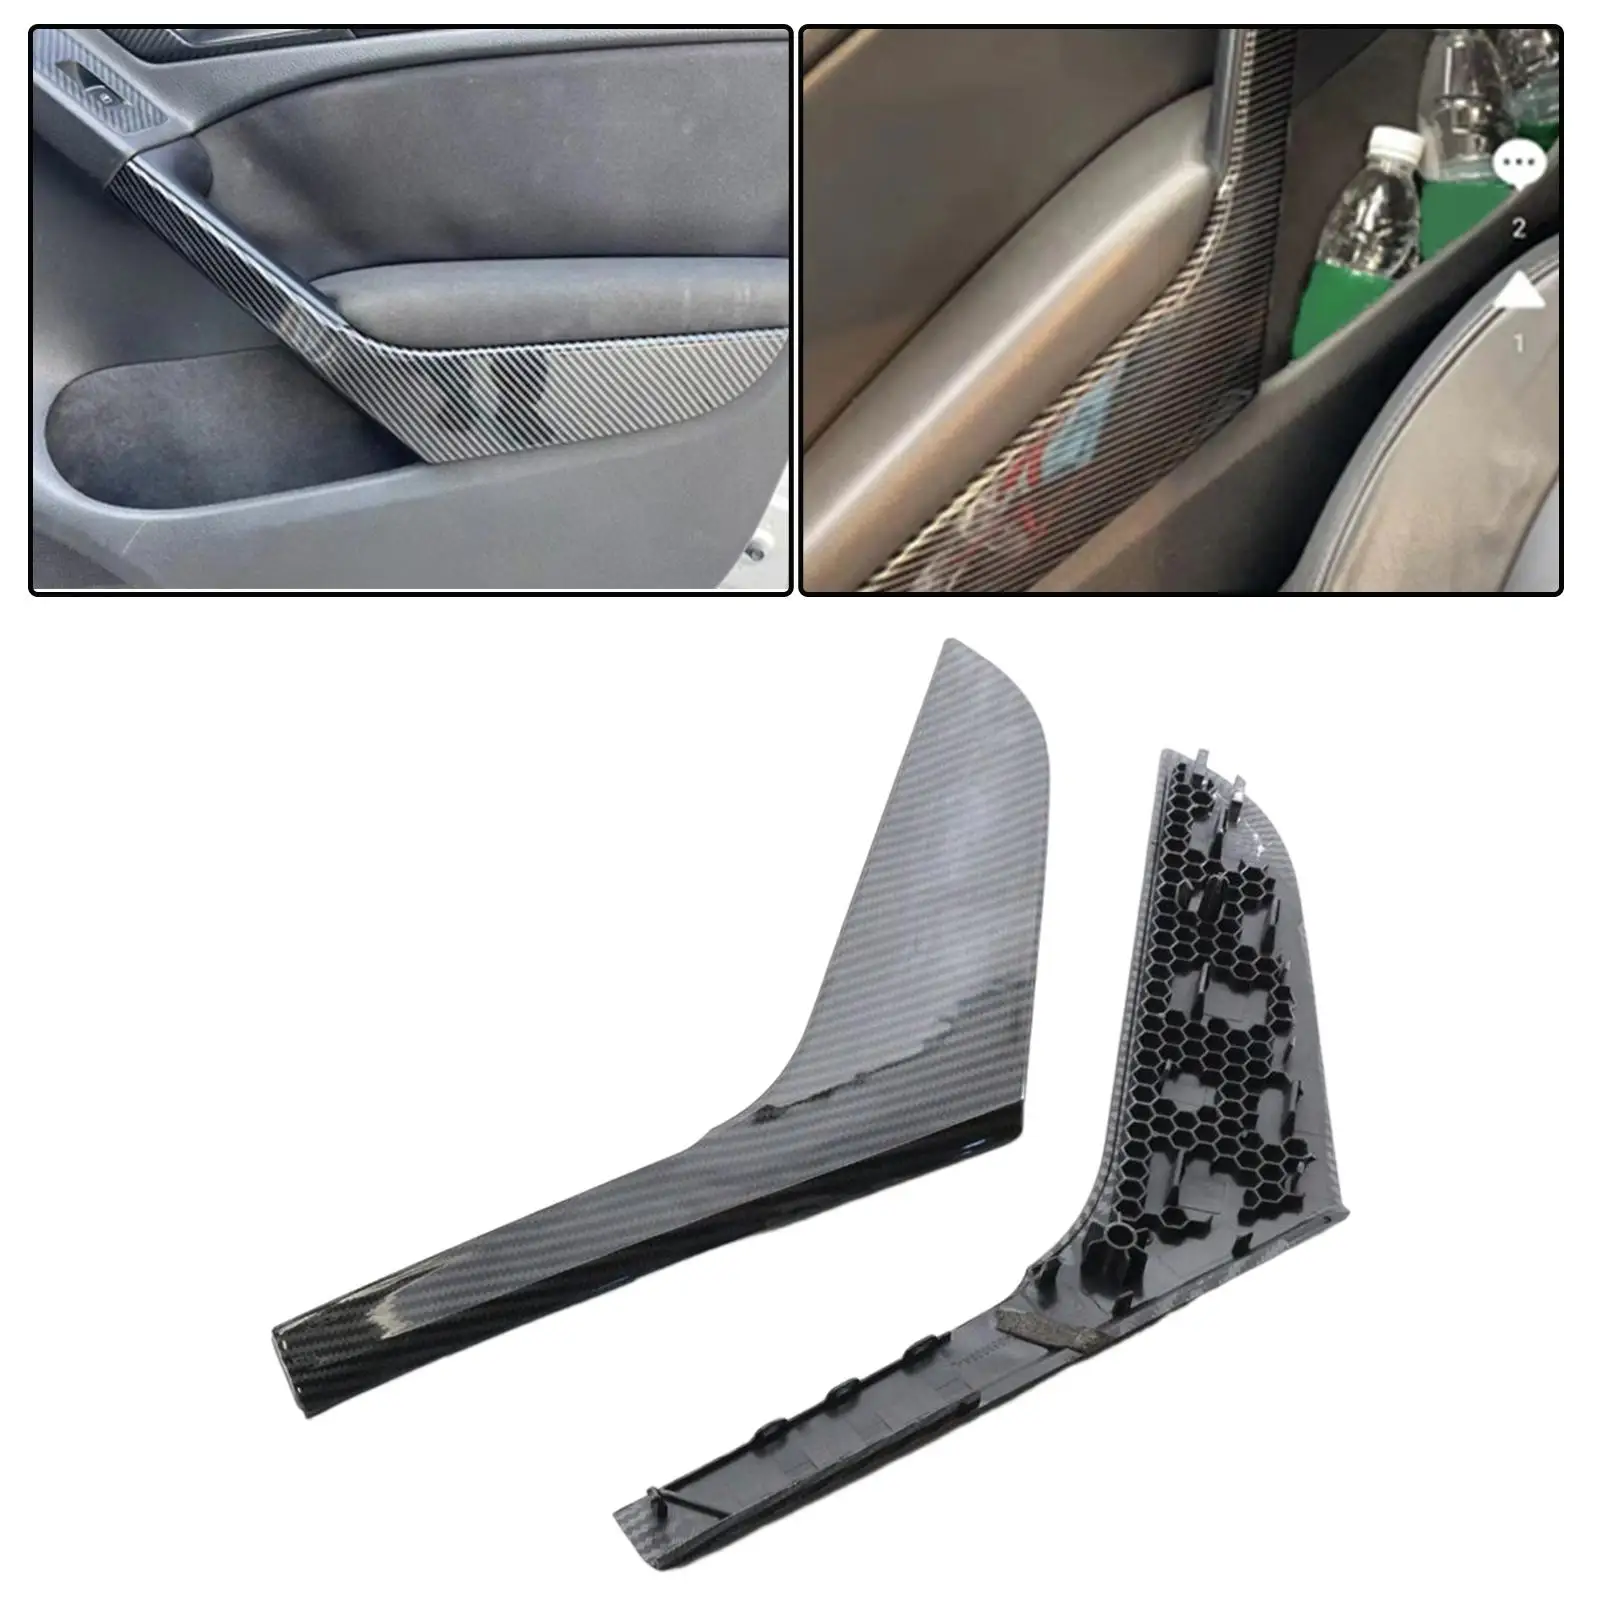 2x Vehicle Interior Door Armrest Cover Trim 5K4868039A Left and Right for Golf MK6 Parts